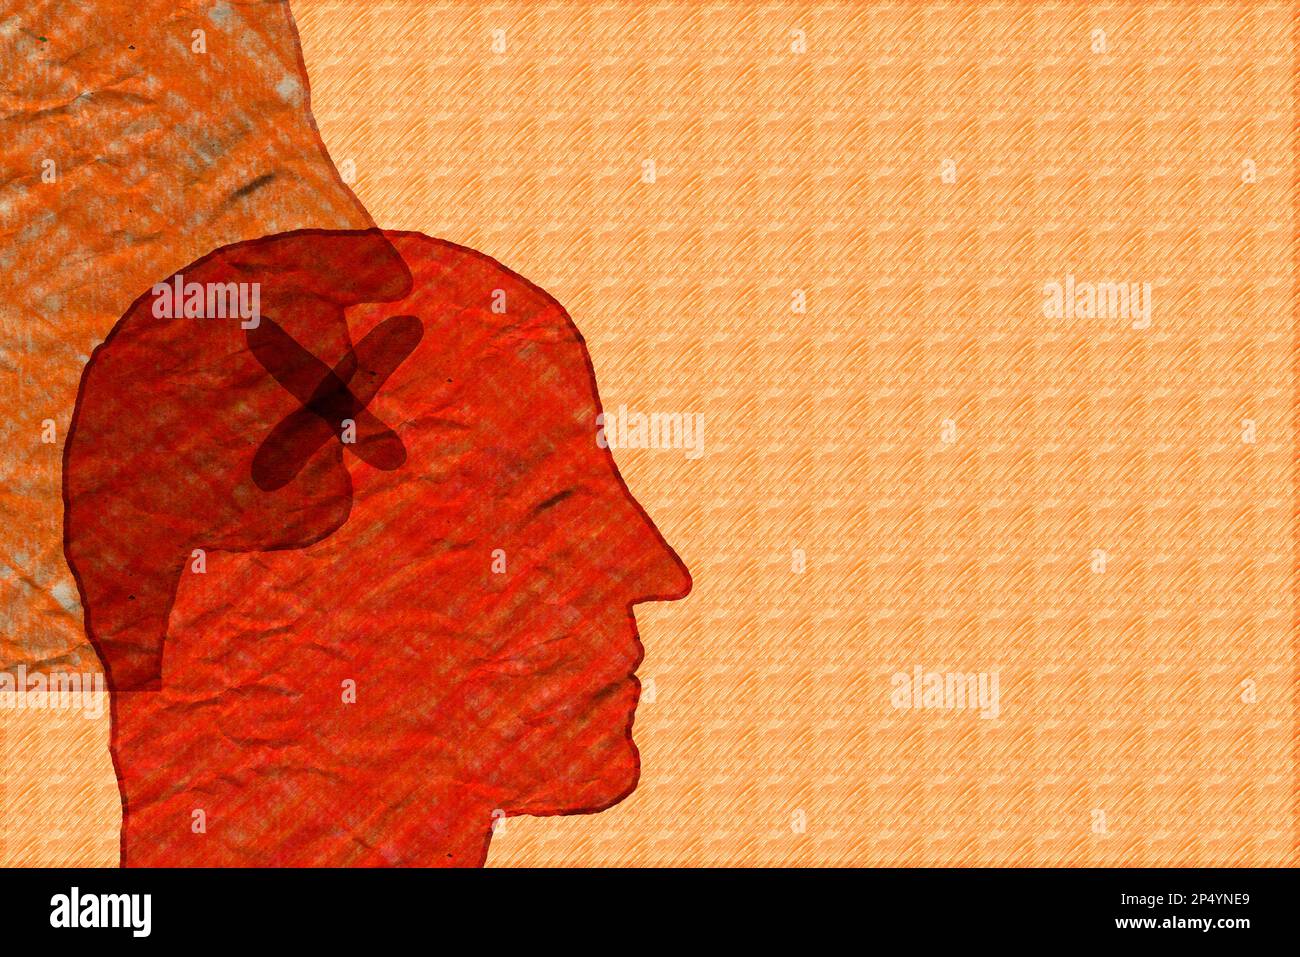 Mental health relative brochure, hidden depression, negative thoughts. Silhouette of a man's head.  Scientific medical designs. Grunge brush drawing. Stock Photo